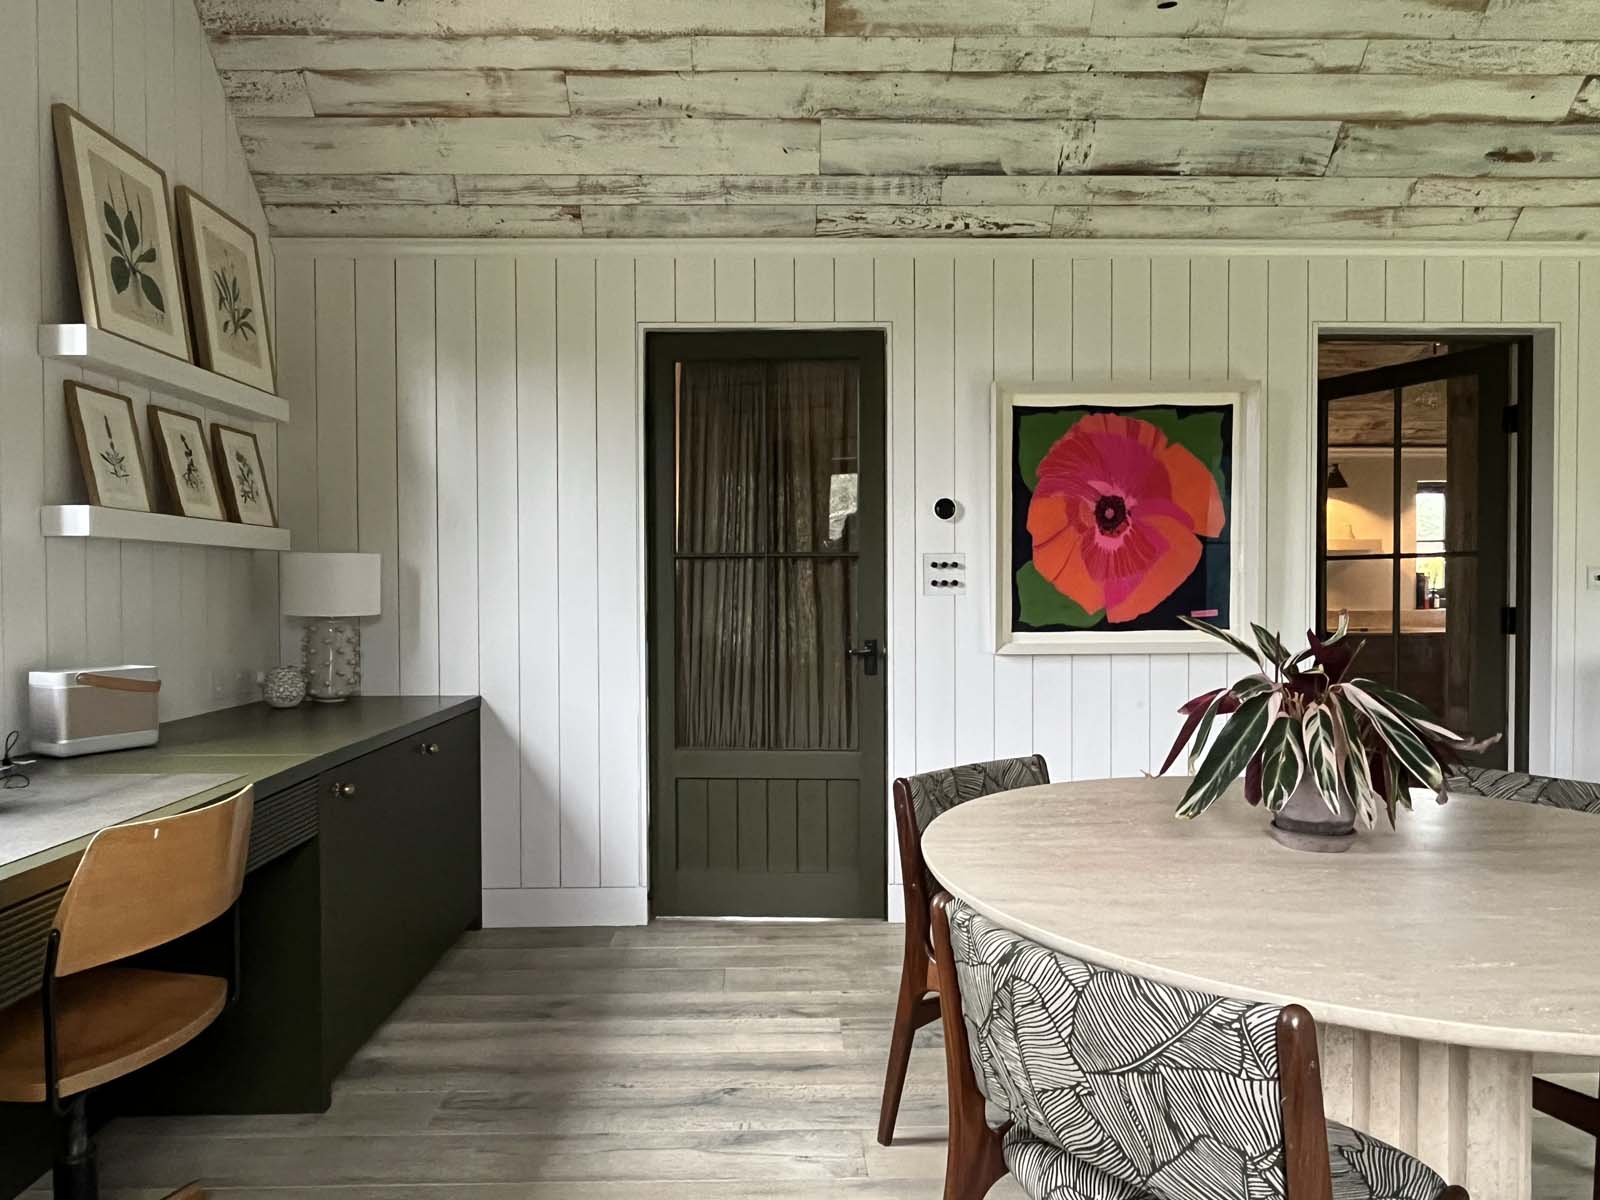 Dining table in wooden panelled room with art work on walls